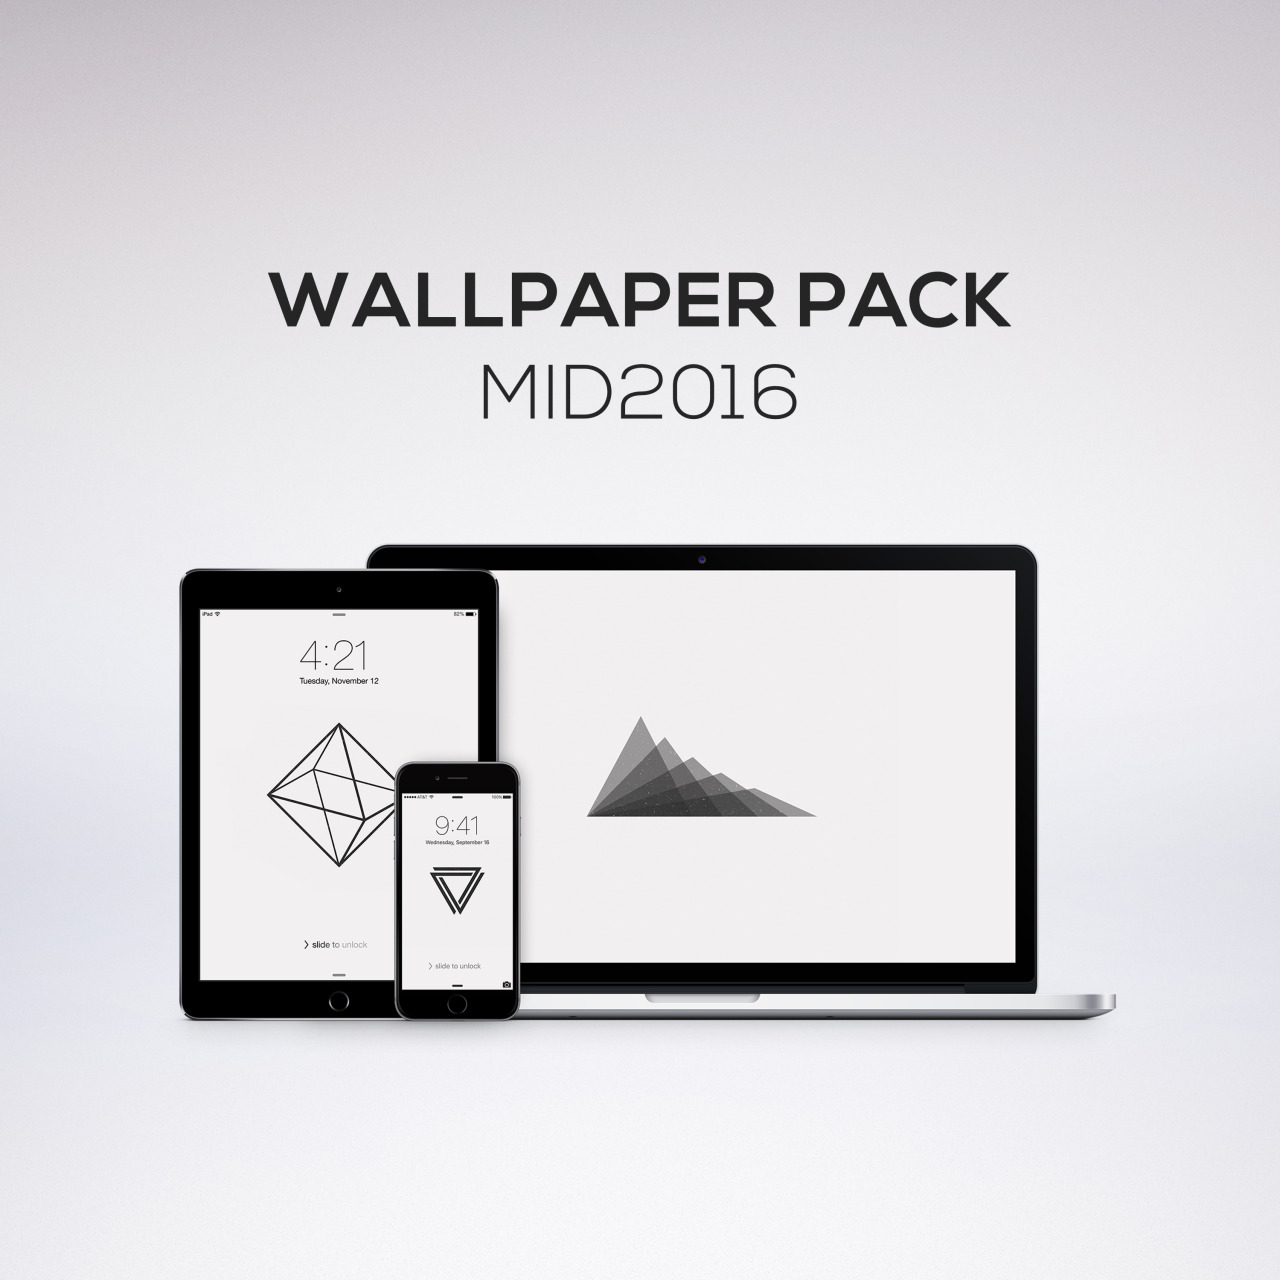 Wallpaper Pack Mid2016
13 New Wallpapers Now Available - Daily Minimal Wallpaper Pack , HD Wallpaper & Backgrounds